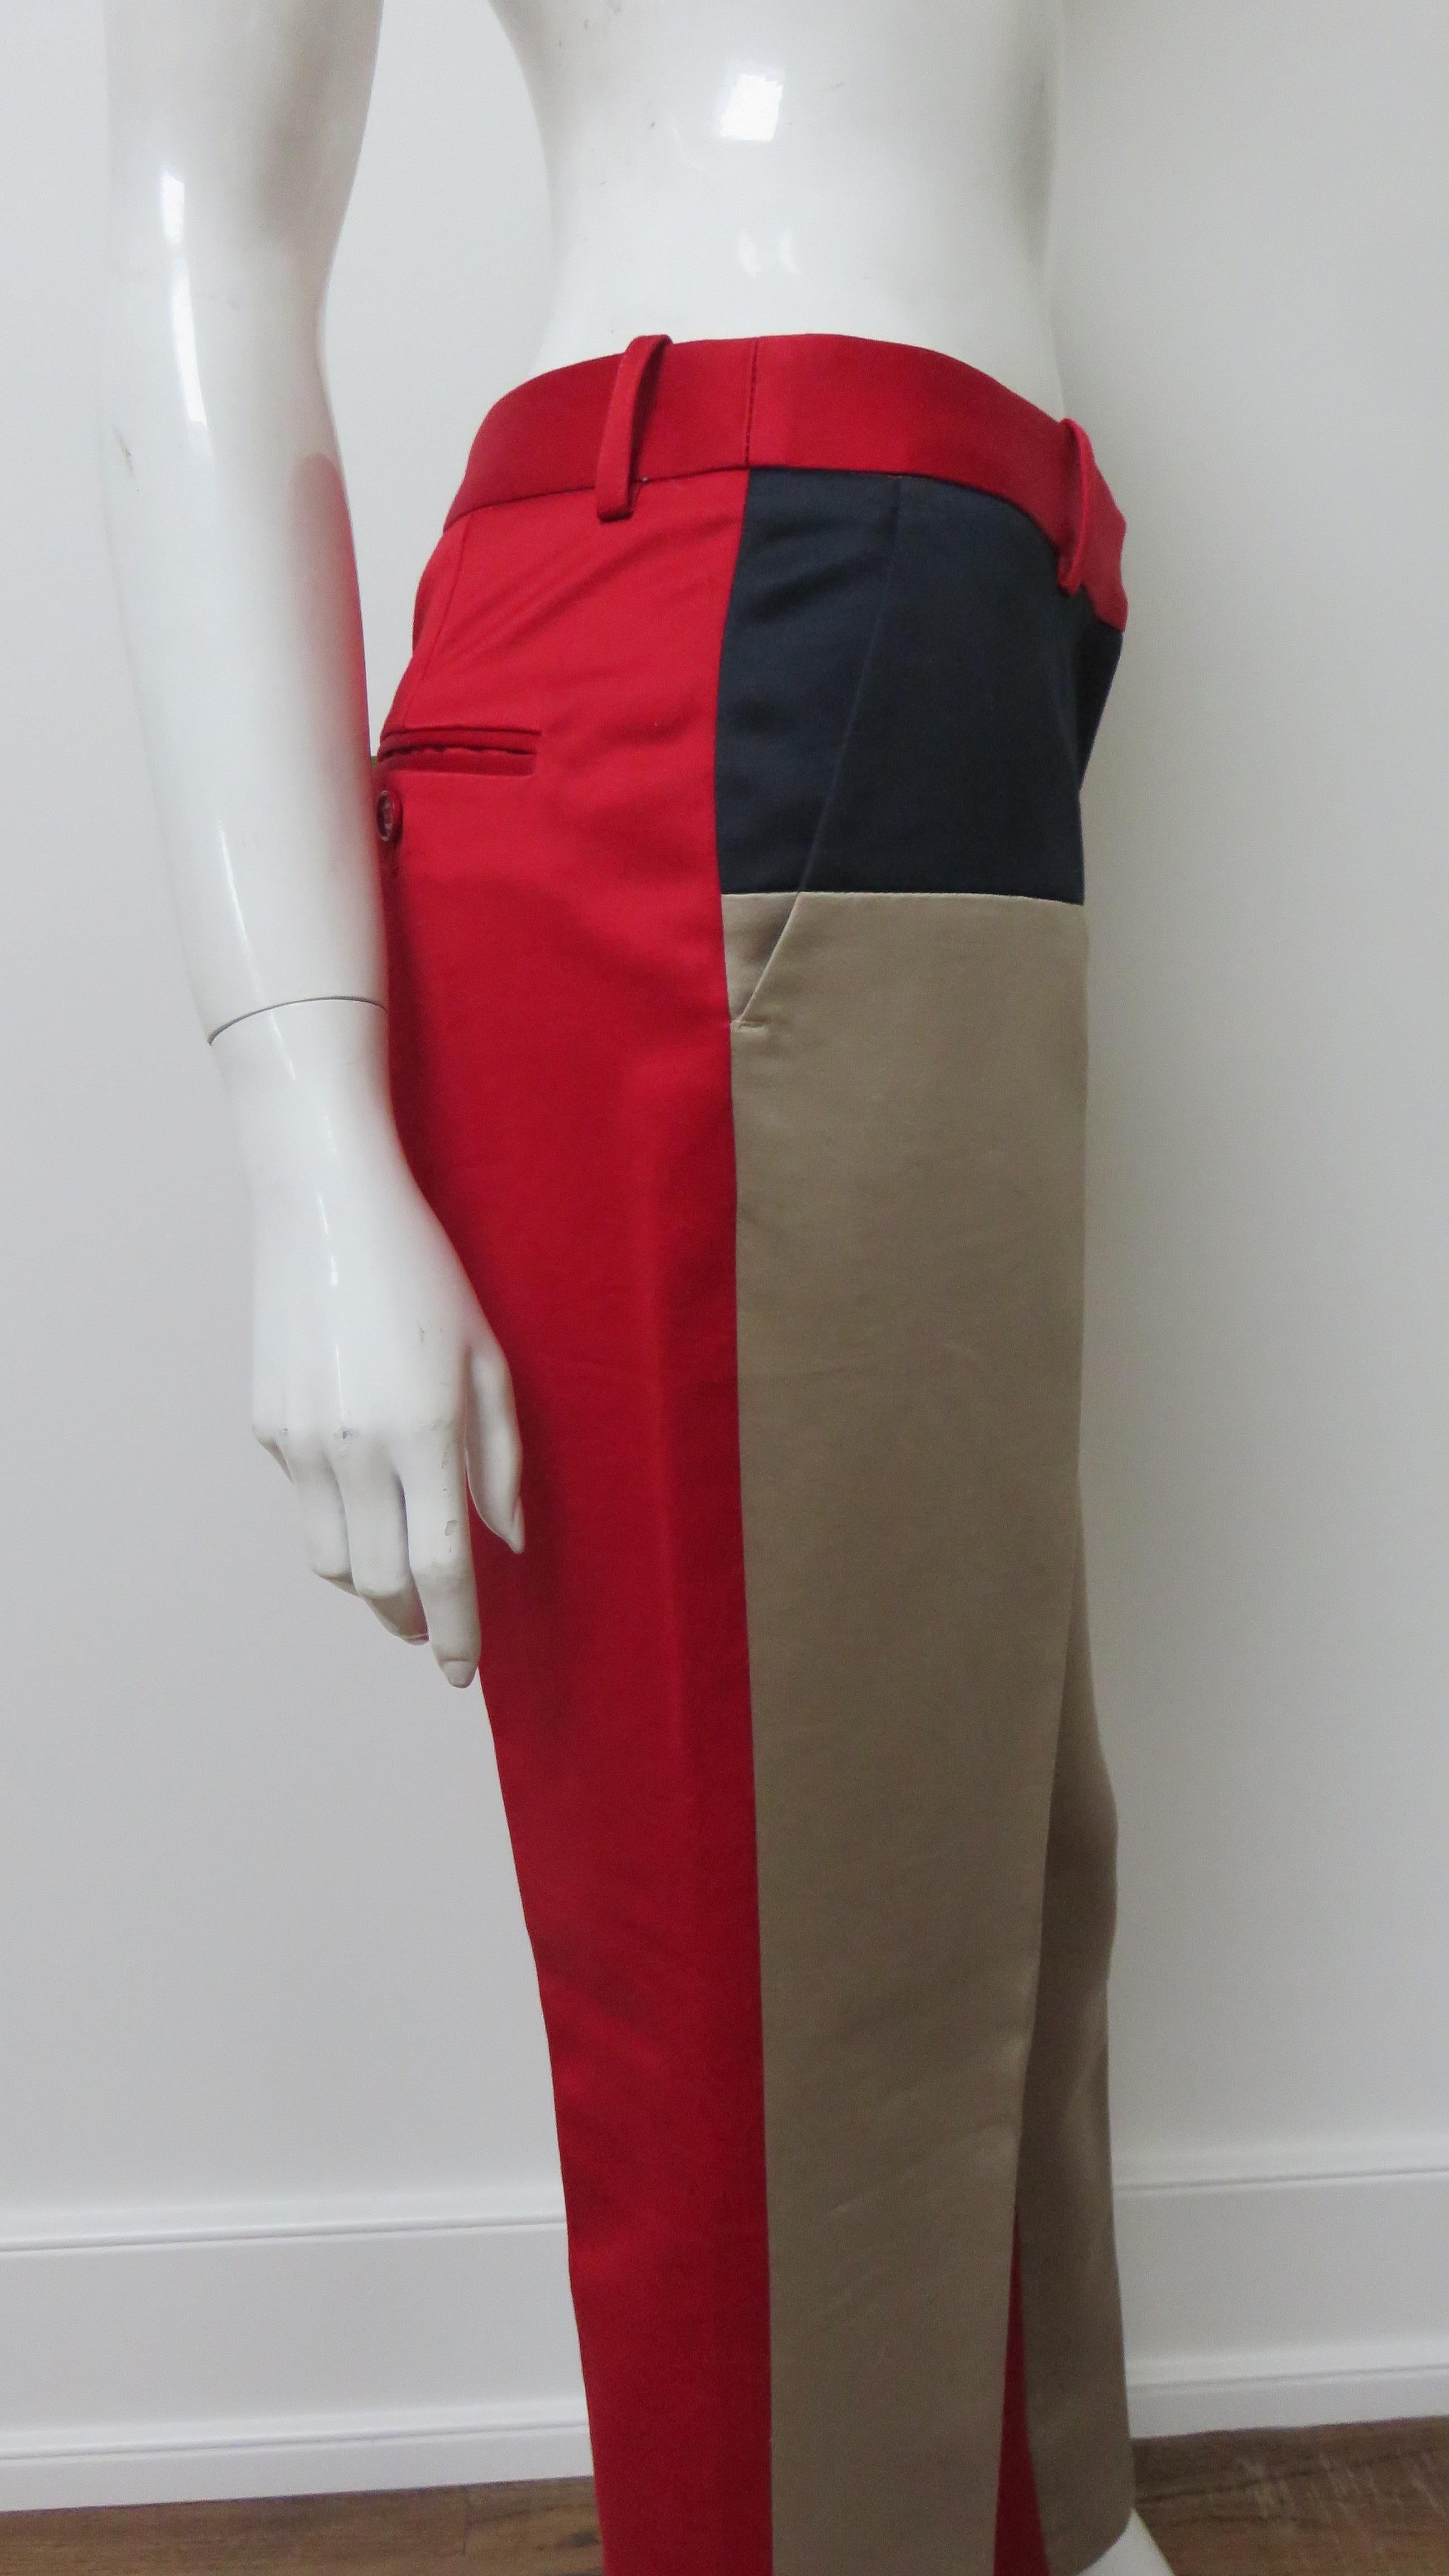 Michael Kors New Color Block Pants In Excellent Condition For Sale In Water Mill, NY